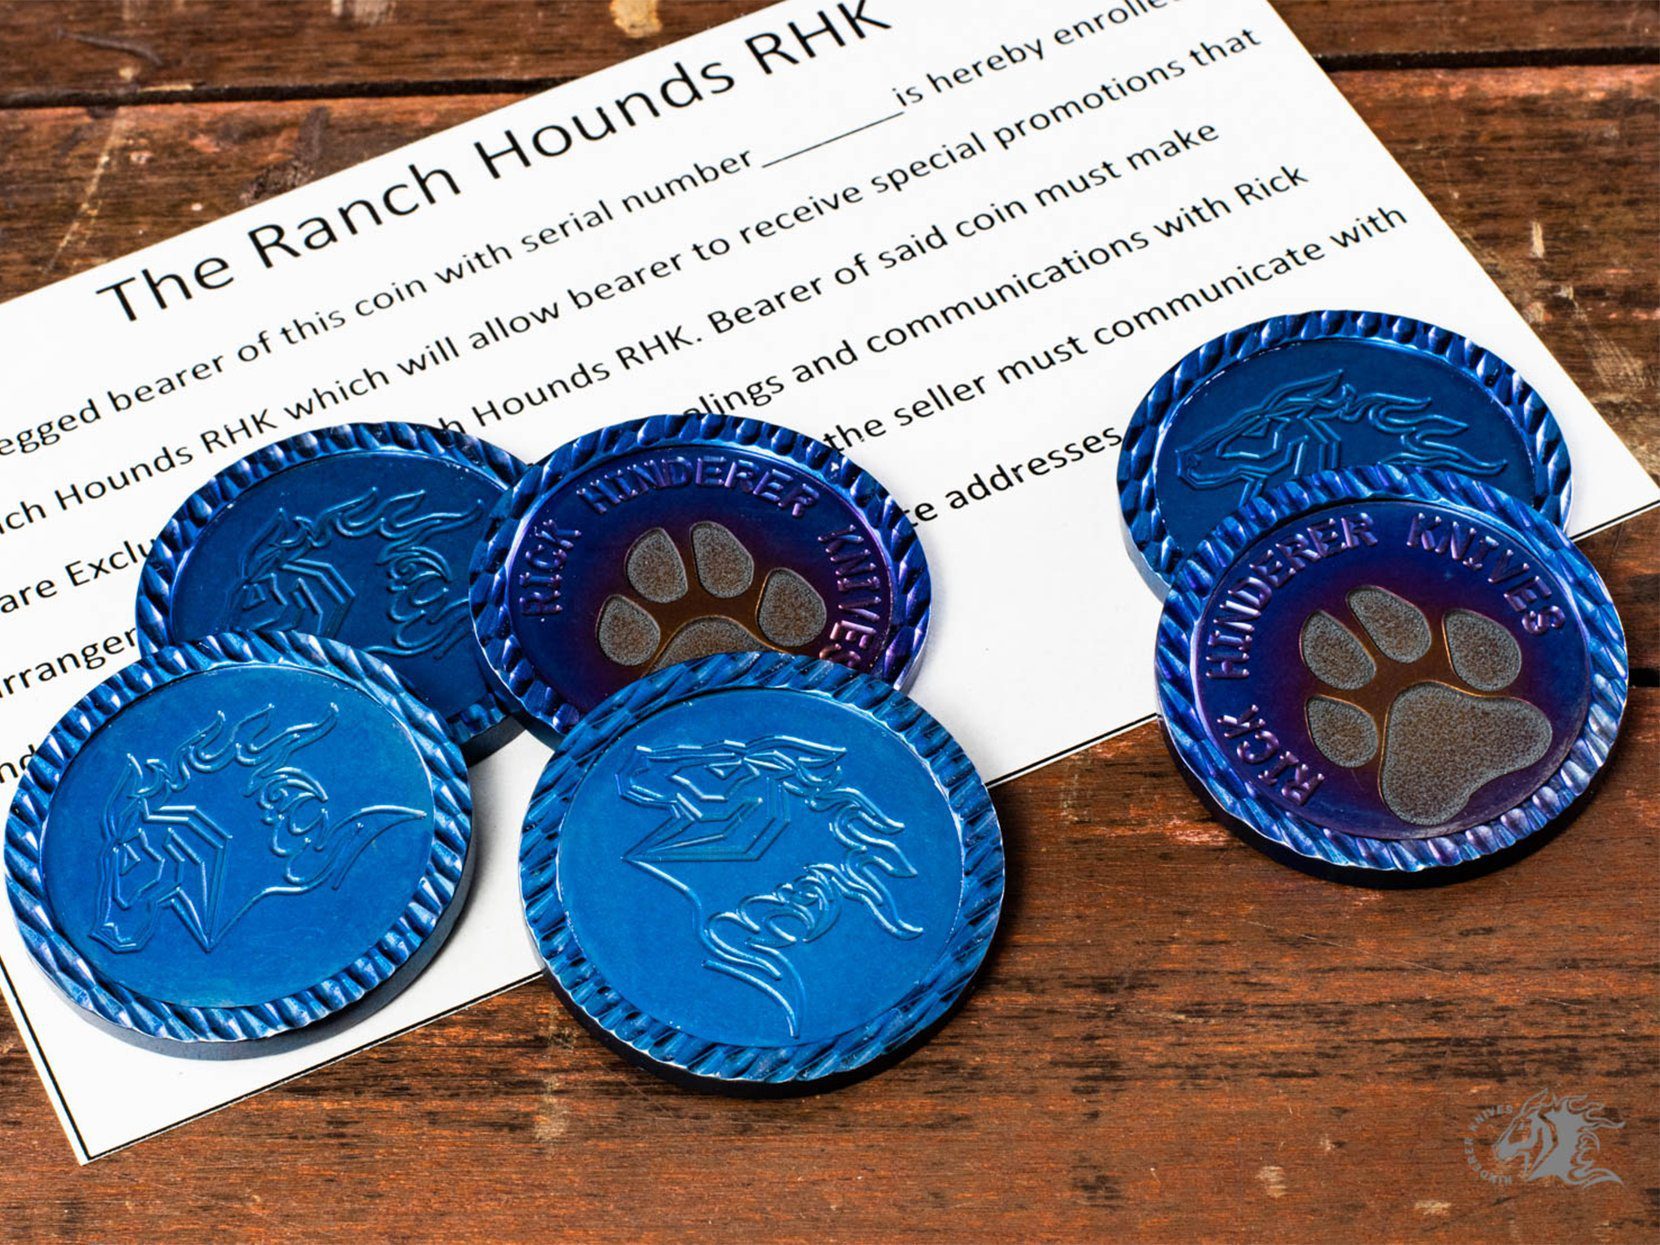 The Ranch Hounds Challange Coin Rick Hinderer Knives